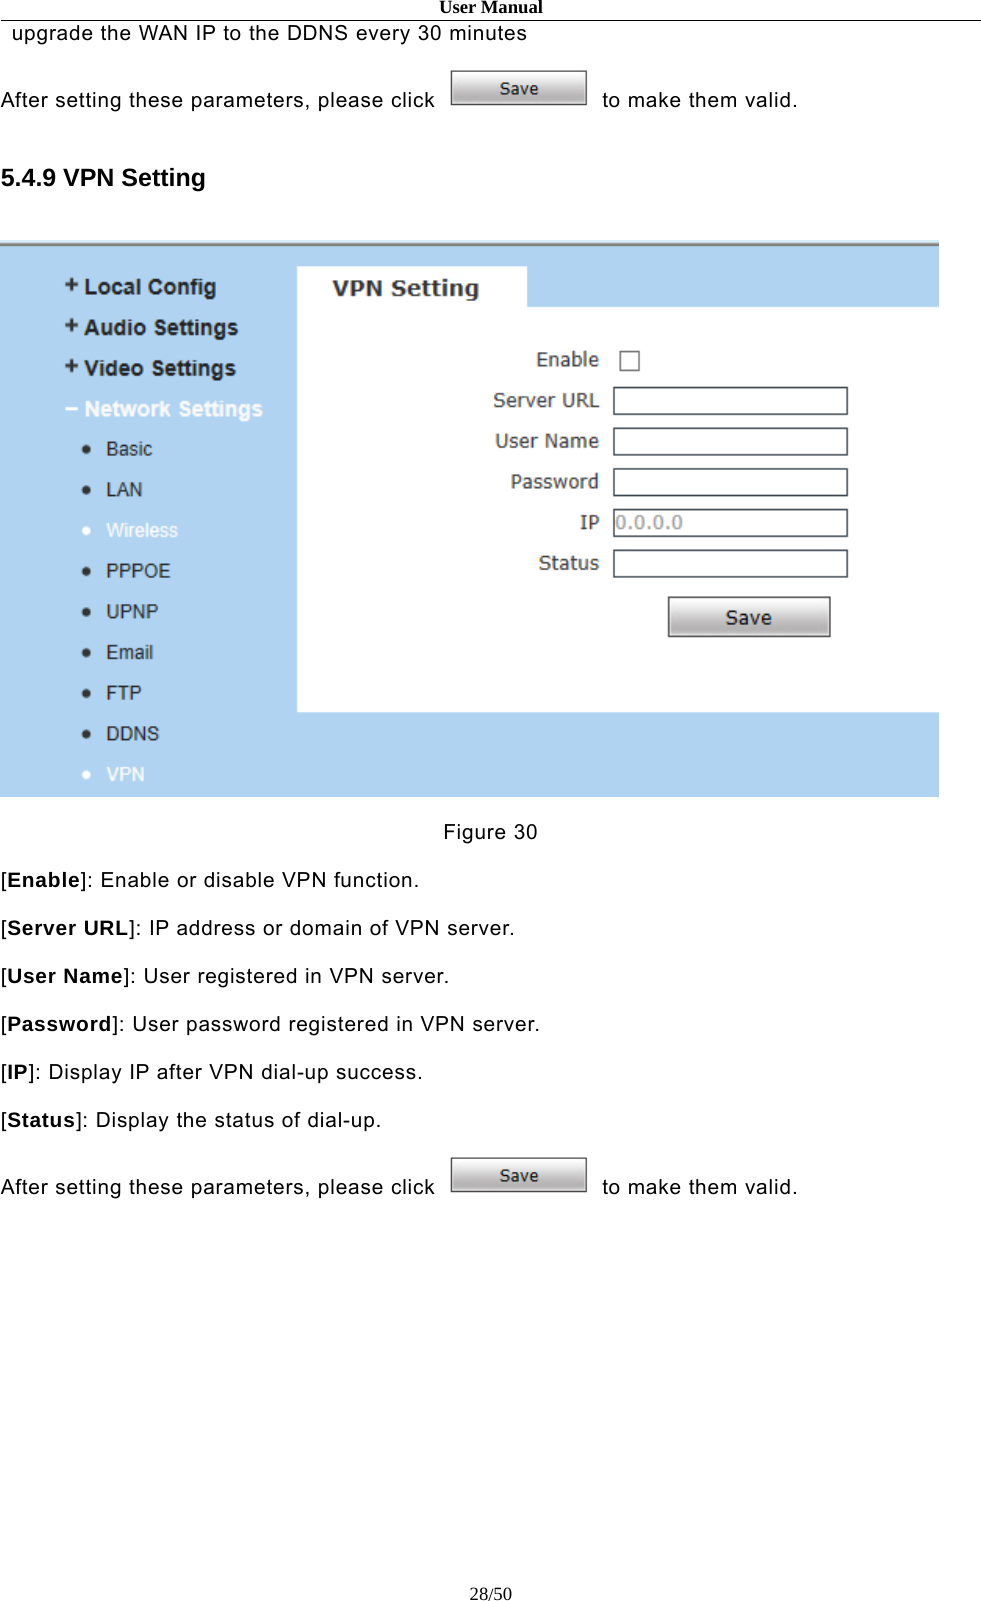 User Manual28/50upgrade the WAN IP to the DDNS every 30 minutesAfter setting these parameters, please click to make them valid.5.4.9 VPN SettingFigure 30[Enable]: Enable or disable VPN function.[Server URL]: IP address or domain of VPN server.[User Name]: User registered in VPN server.[Password]: User password registered in VPN server.[IP]: Display IP after VPN dial-up success.[Status]: Display the status of dial-up.After setting these parameters, please click to make them valid.